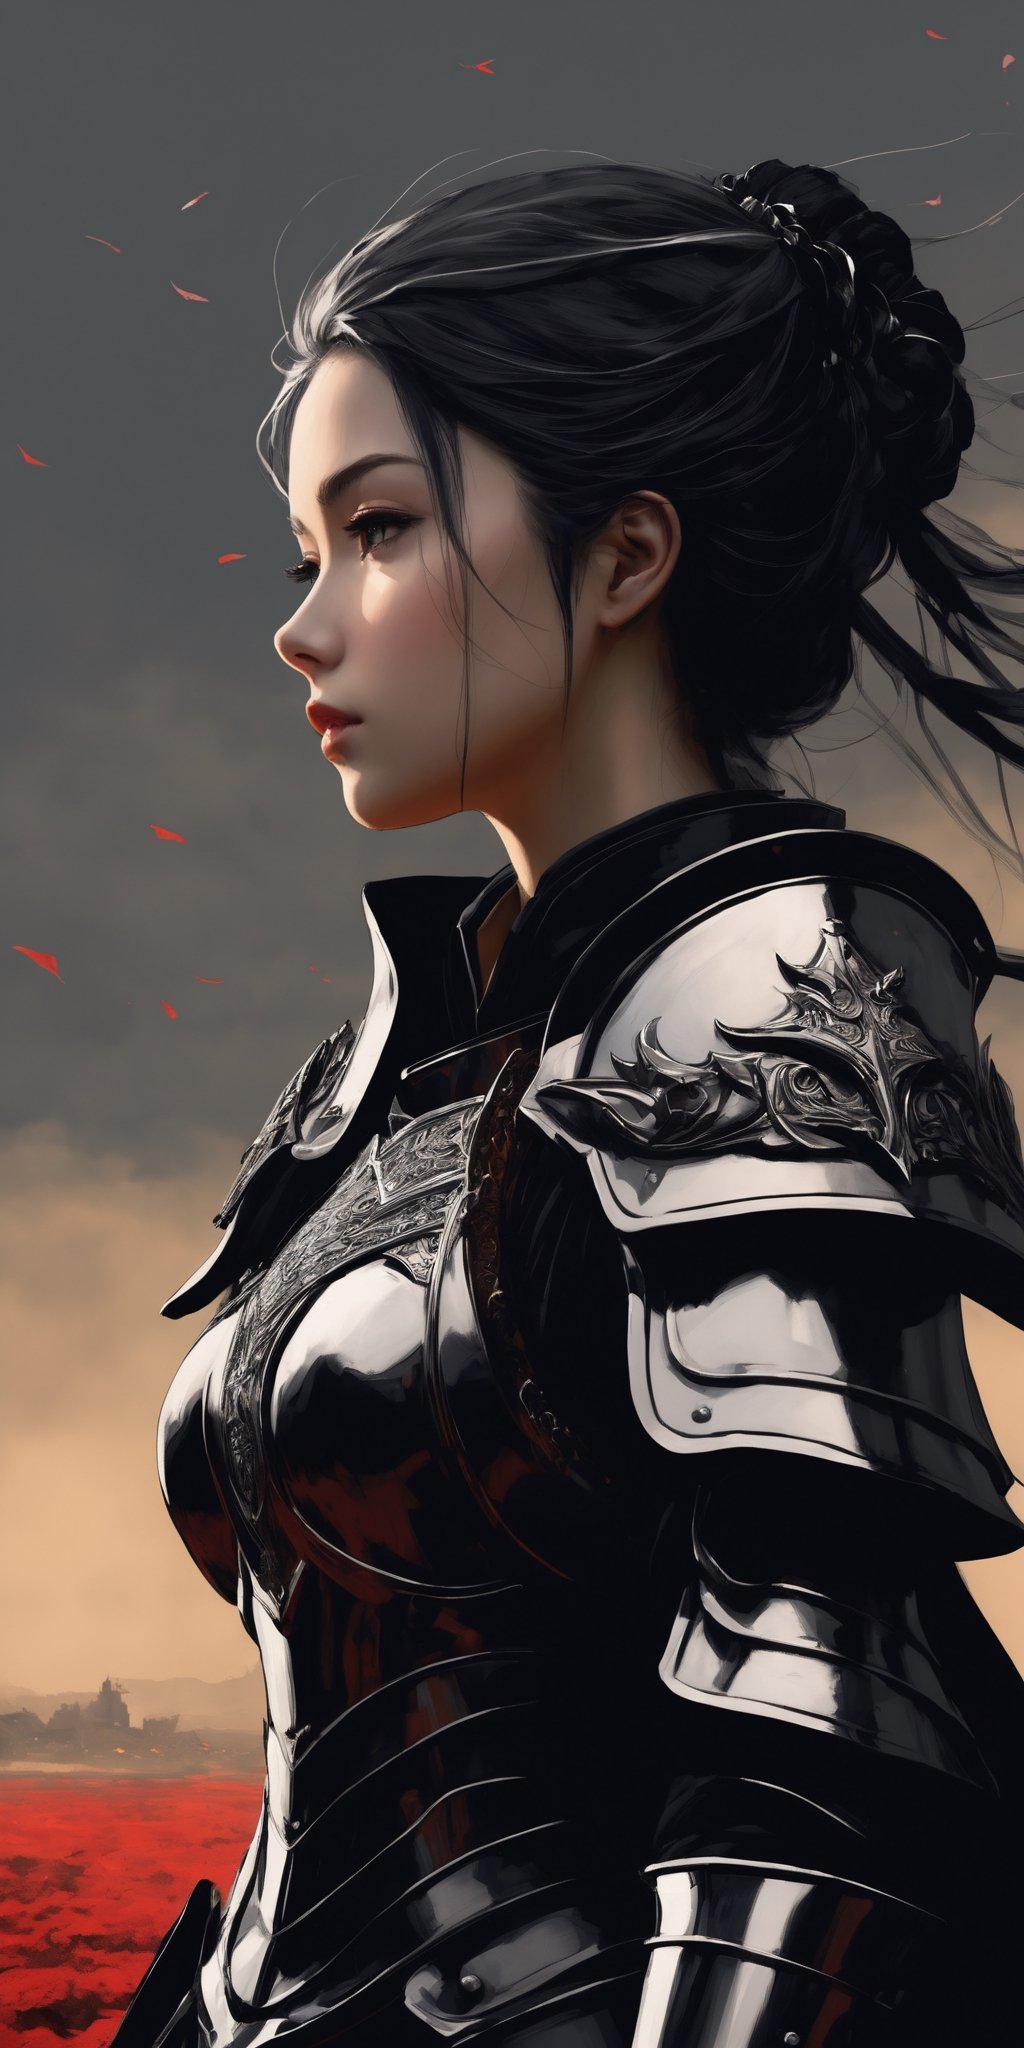 masterpiece, high_res, high quality, 
(side view:1.5), (full length view:1.5), epic fantasy illustration, merge detalization of manga style and realistic drawning of tradtiional arts, flat, dark colors palette, ink drawning, fiction,
incredibly beautiful and attractive woman weared armor, stands with her shoulders slumped, sad and exhausted, (very detailed outfit:1.3). (a woman must convey fragile beauty on whose shoulders lies the fate of the world and this oppresses her). the picture looks like a book cover. Use histories about feamle heroes. 
Surreal battlefield background, fusion cruelty of real war and symbolism of hero eposes, intricate and unexpected detailes. Dark and gothic. 
